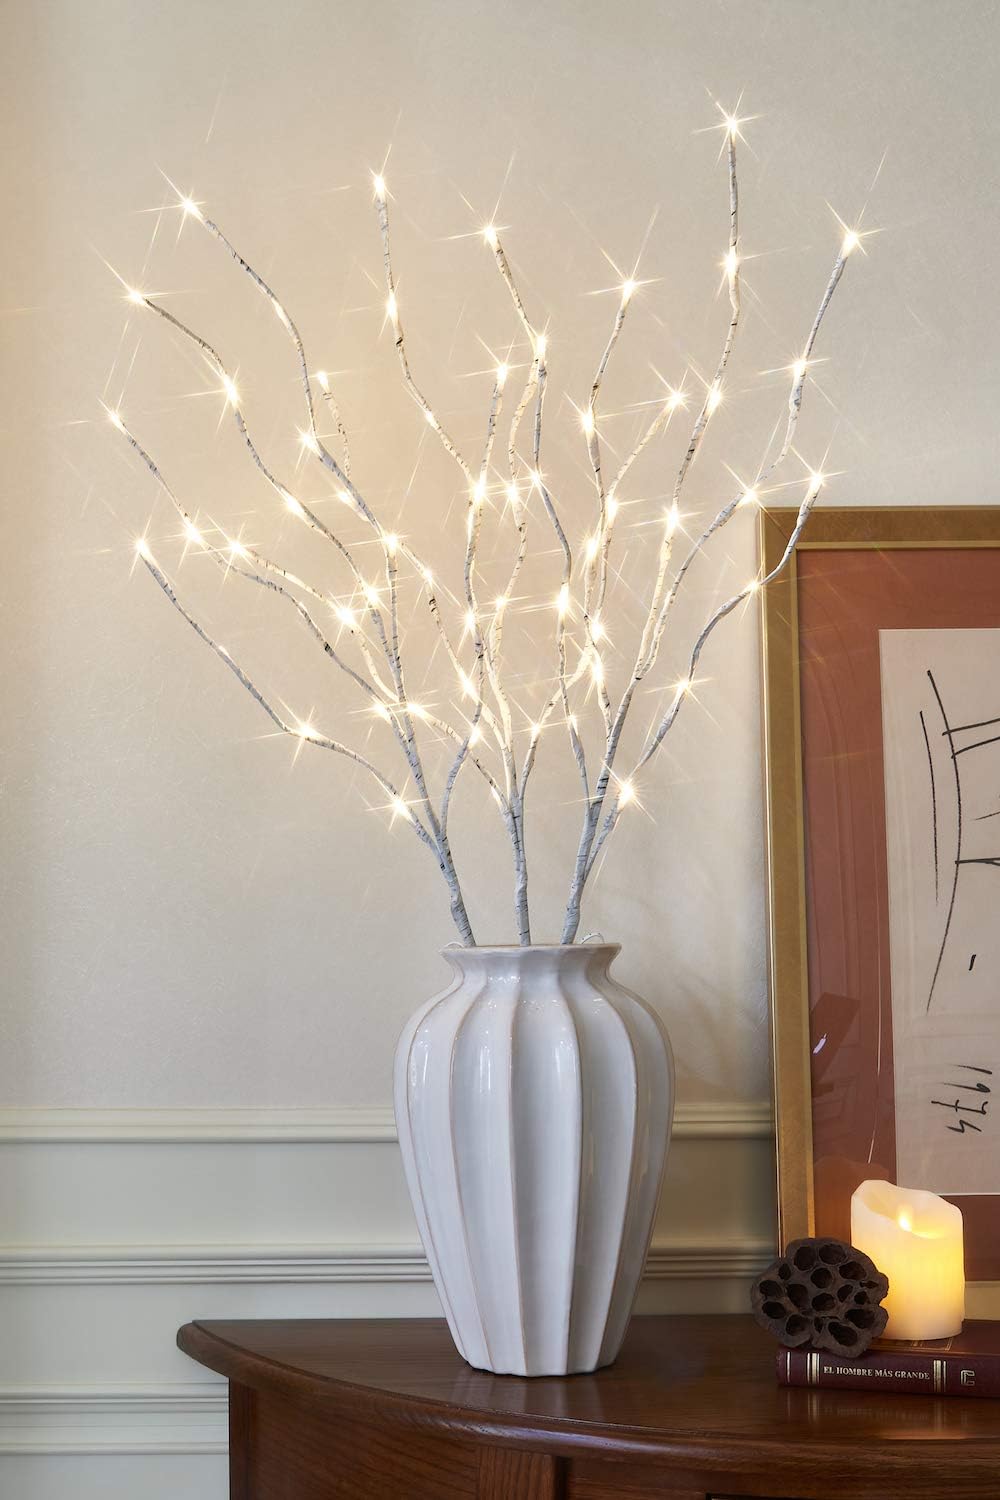 Home Decorative Twig Lights Lighted White Birch Twig Branches Pathway Stakes with 60 LED White Lights Waterproof Plug in for Outdoor and Indoor Decor (3PK, 76cm)